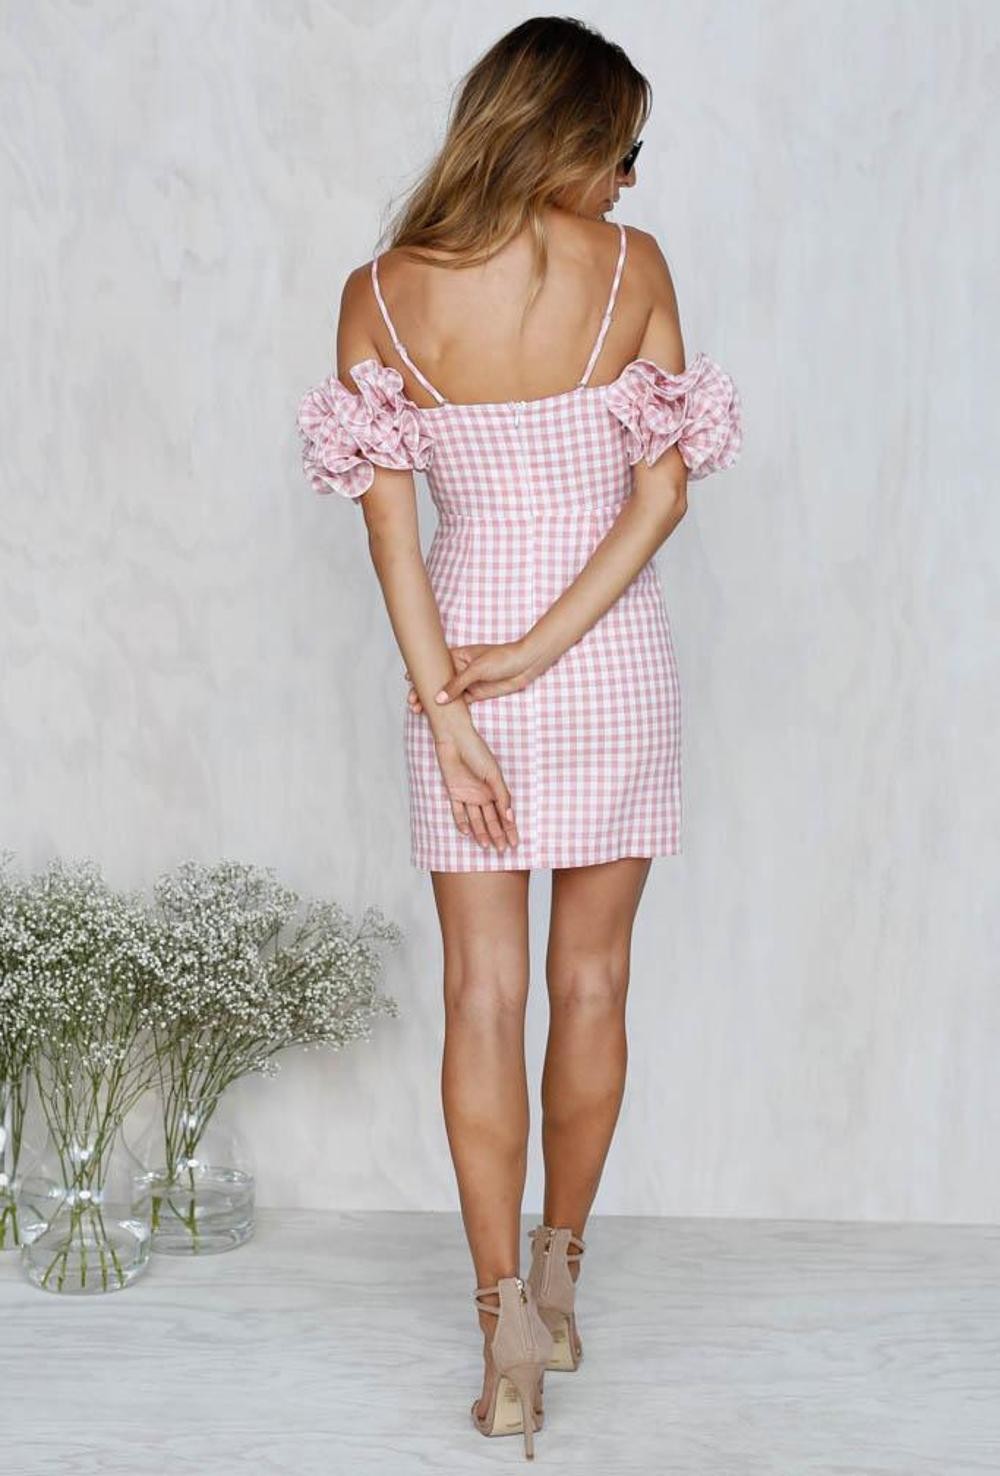 Quality 2018 New Arrivals Clothing Ruffled Sleeve Pink Gingham Women Dresses Summer wholesale